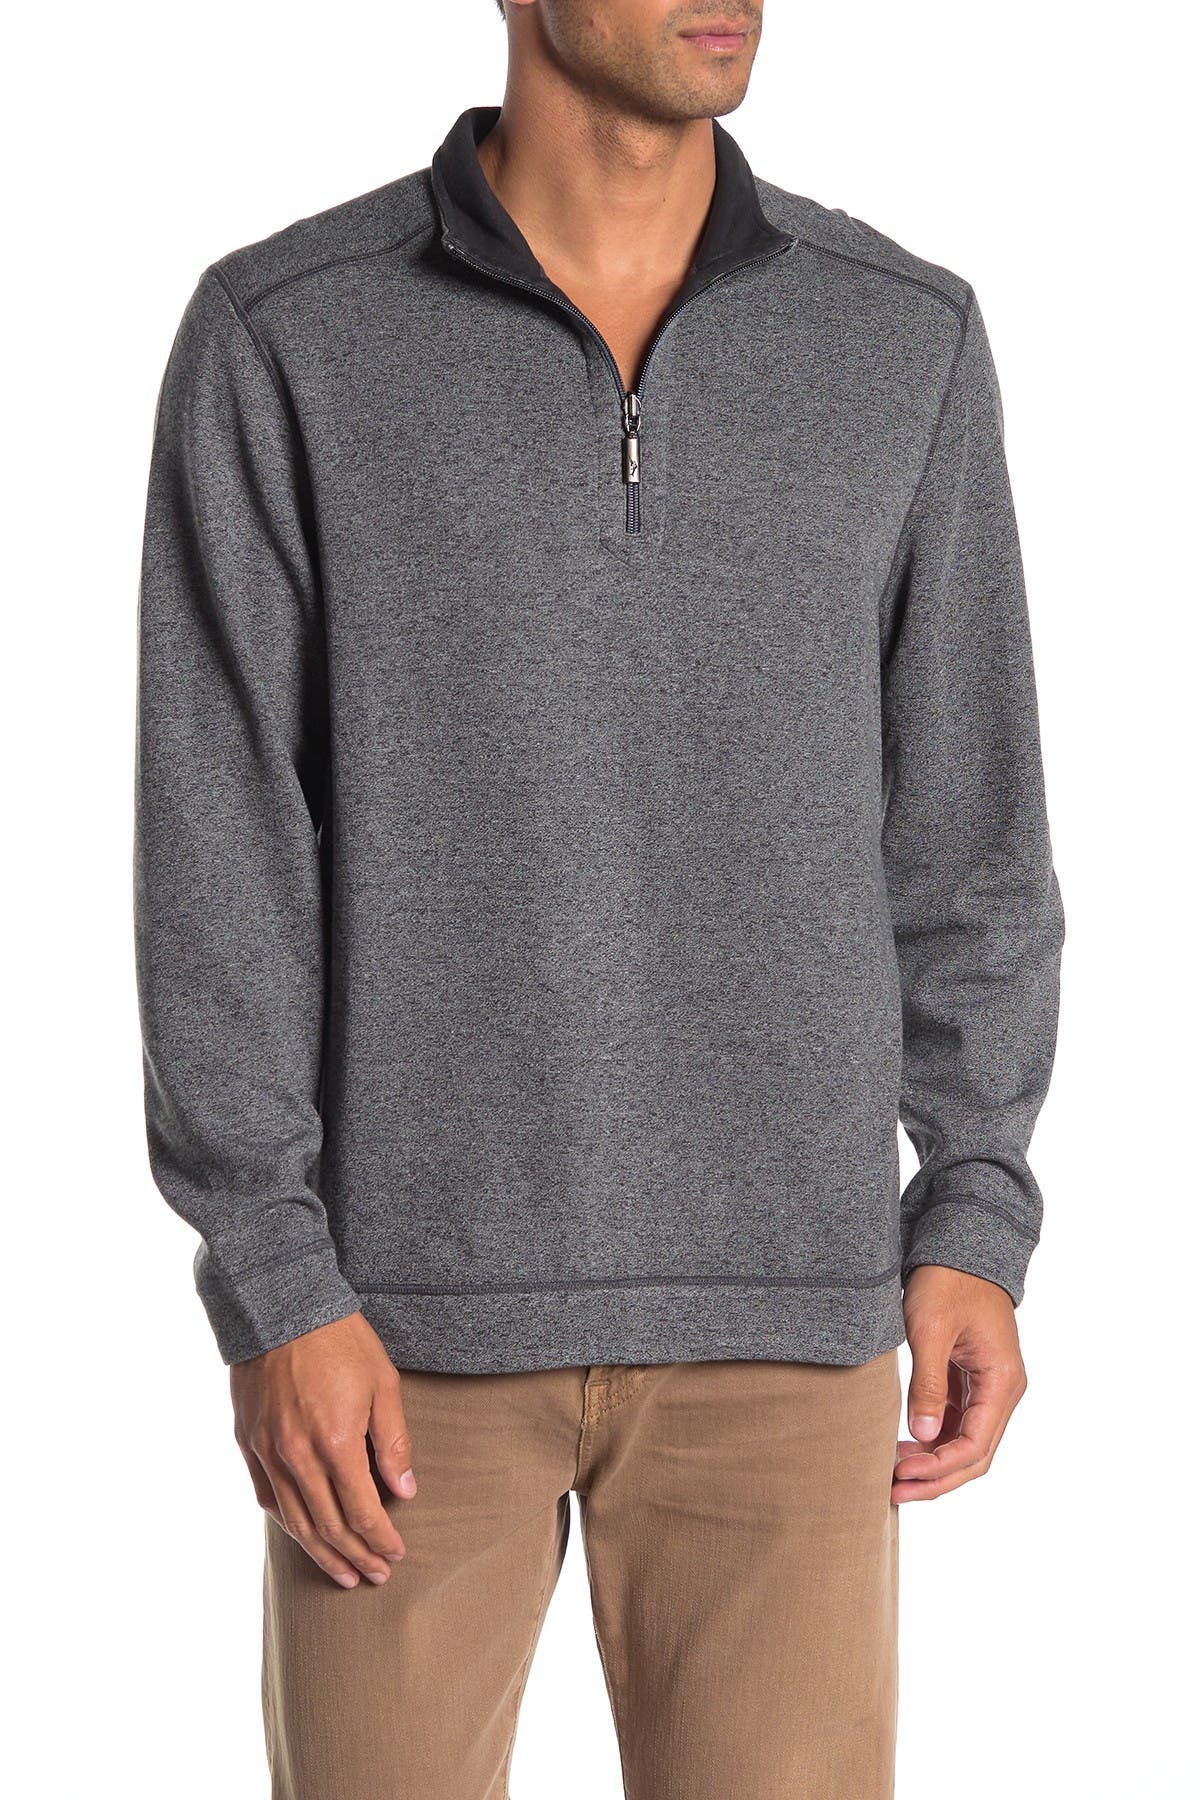 tommy bahama pullover reversible